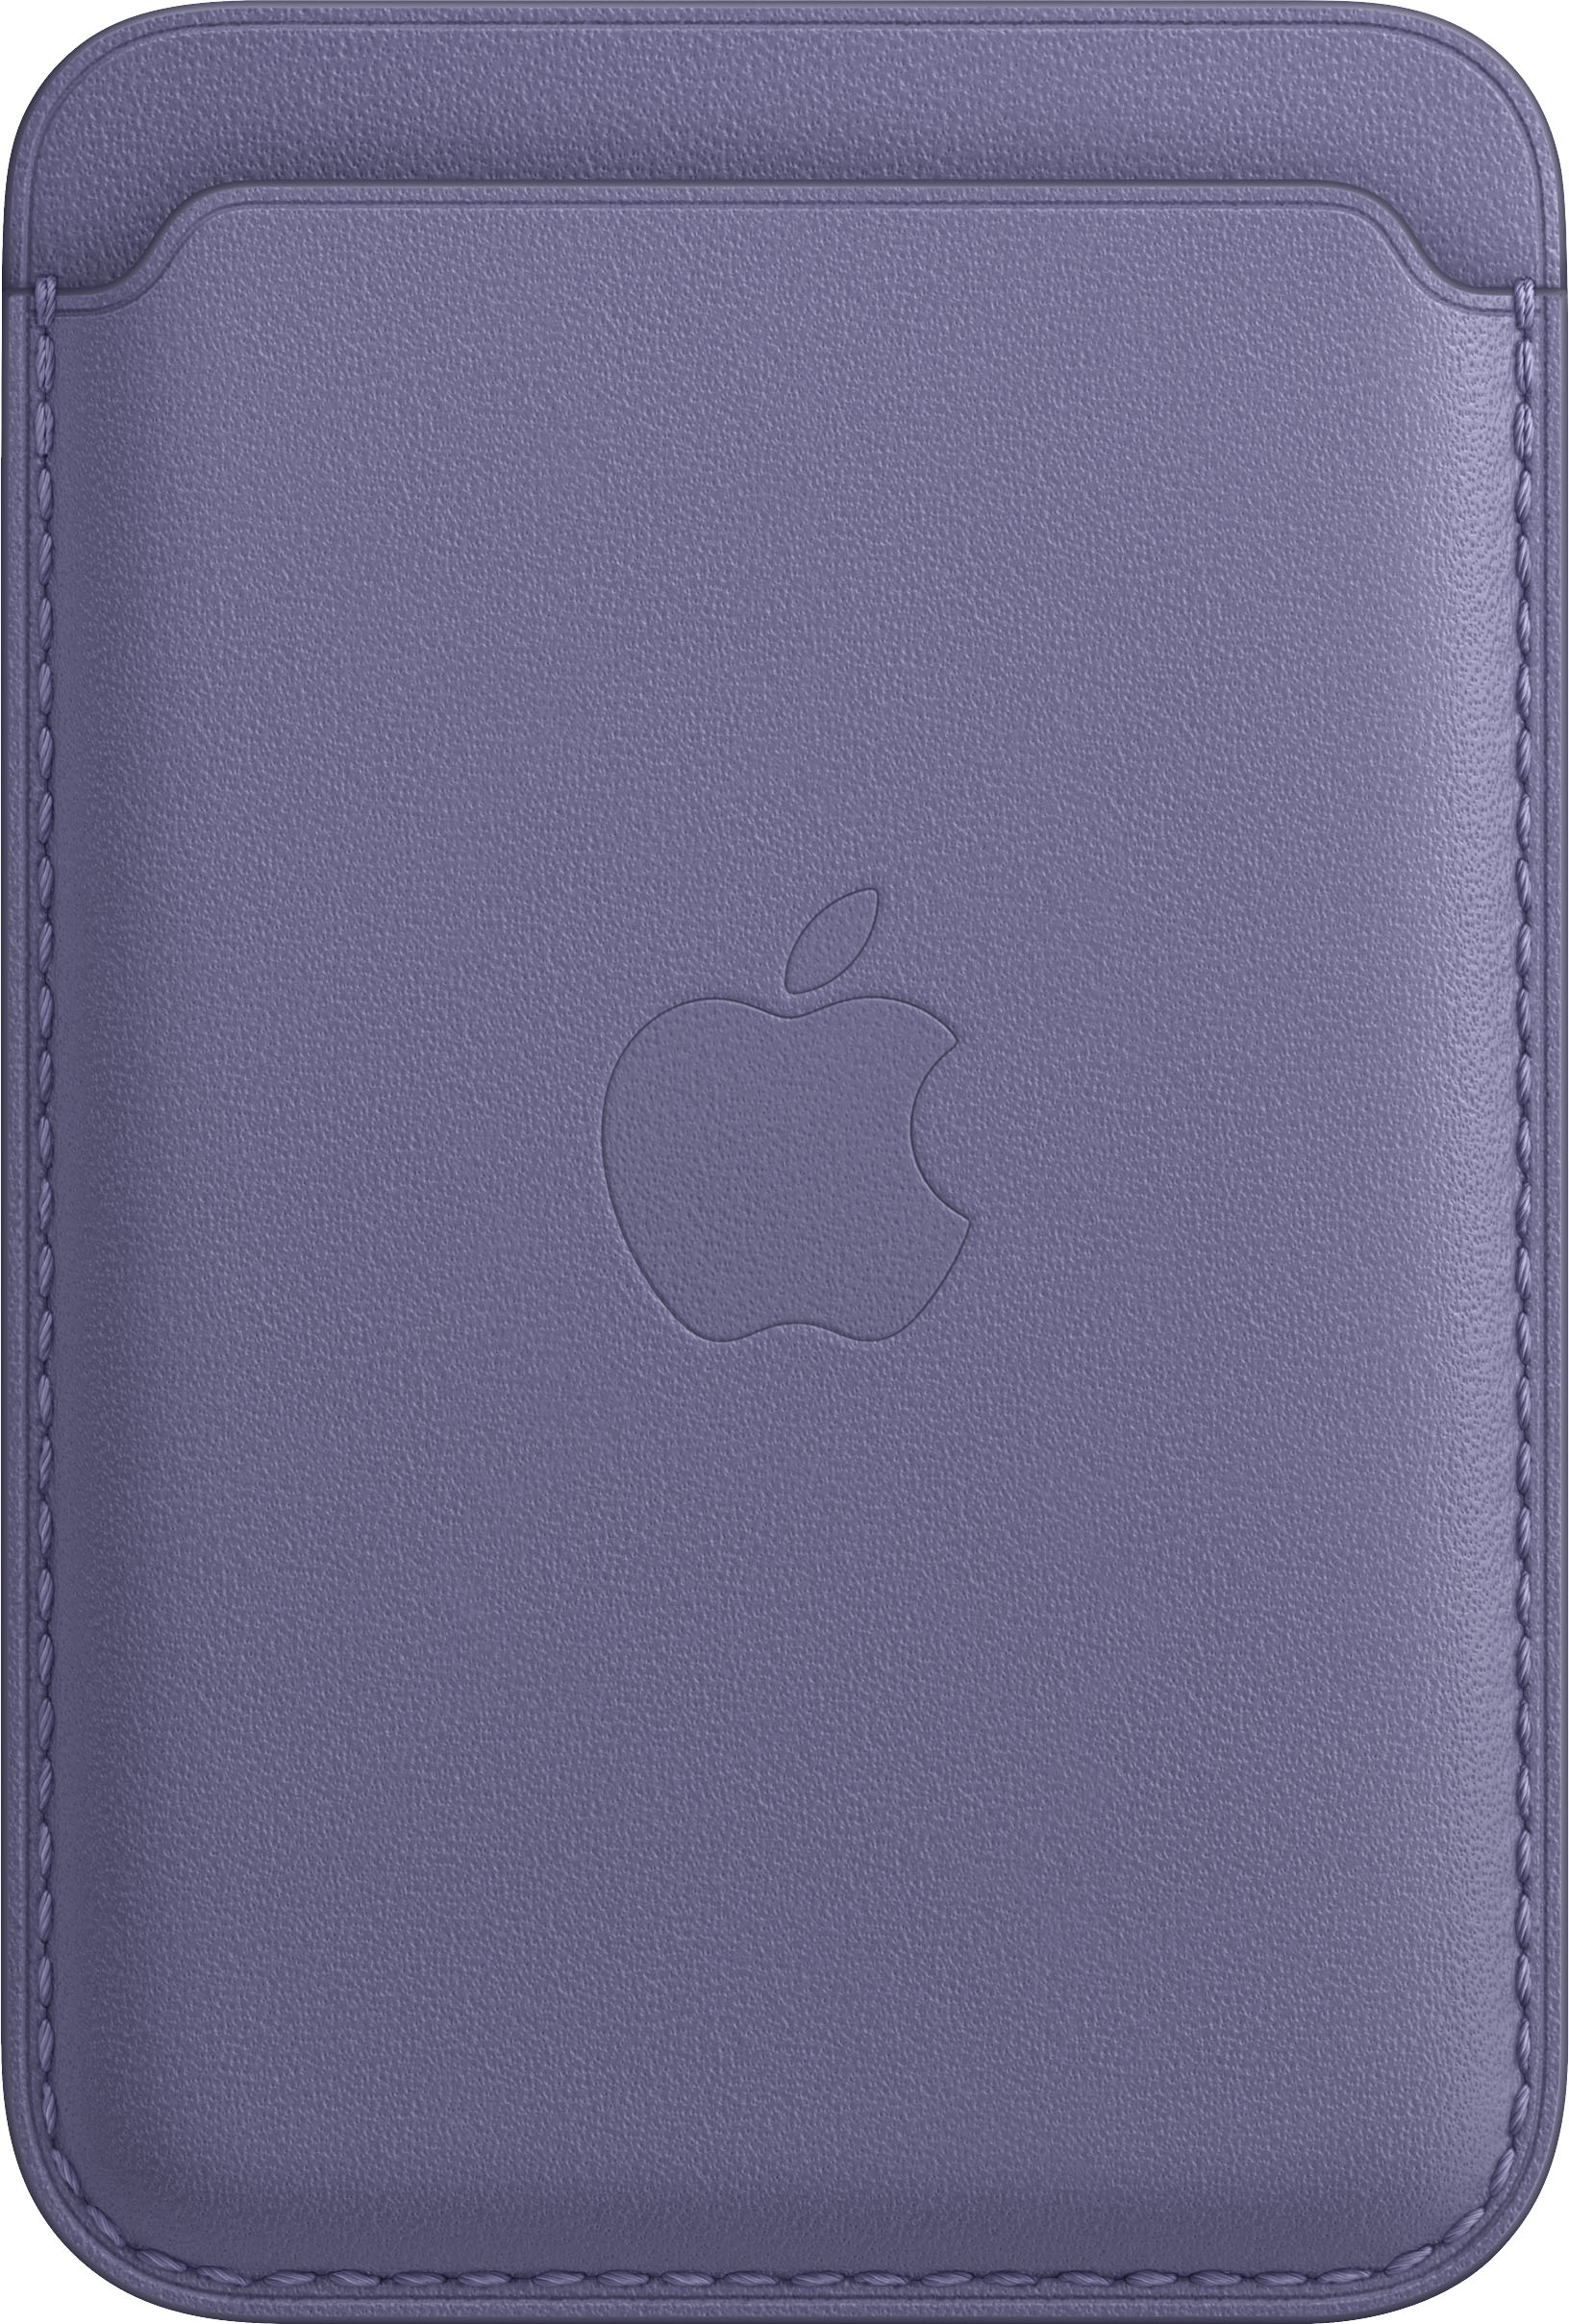 Apple iPhone Leather Wallet (All Colors) With Magsafe Review